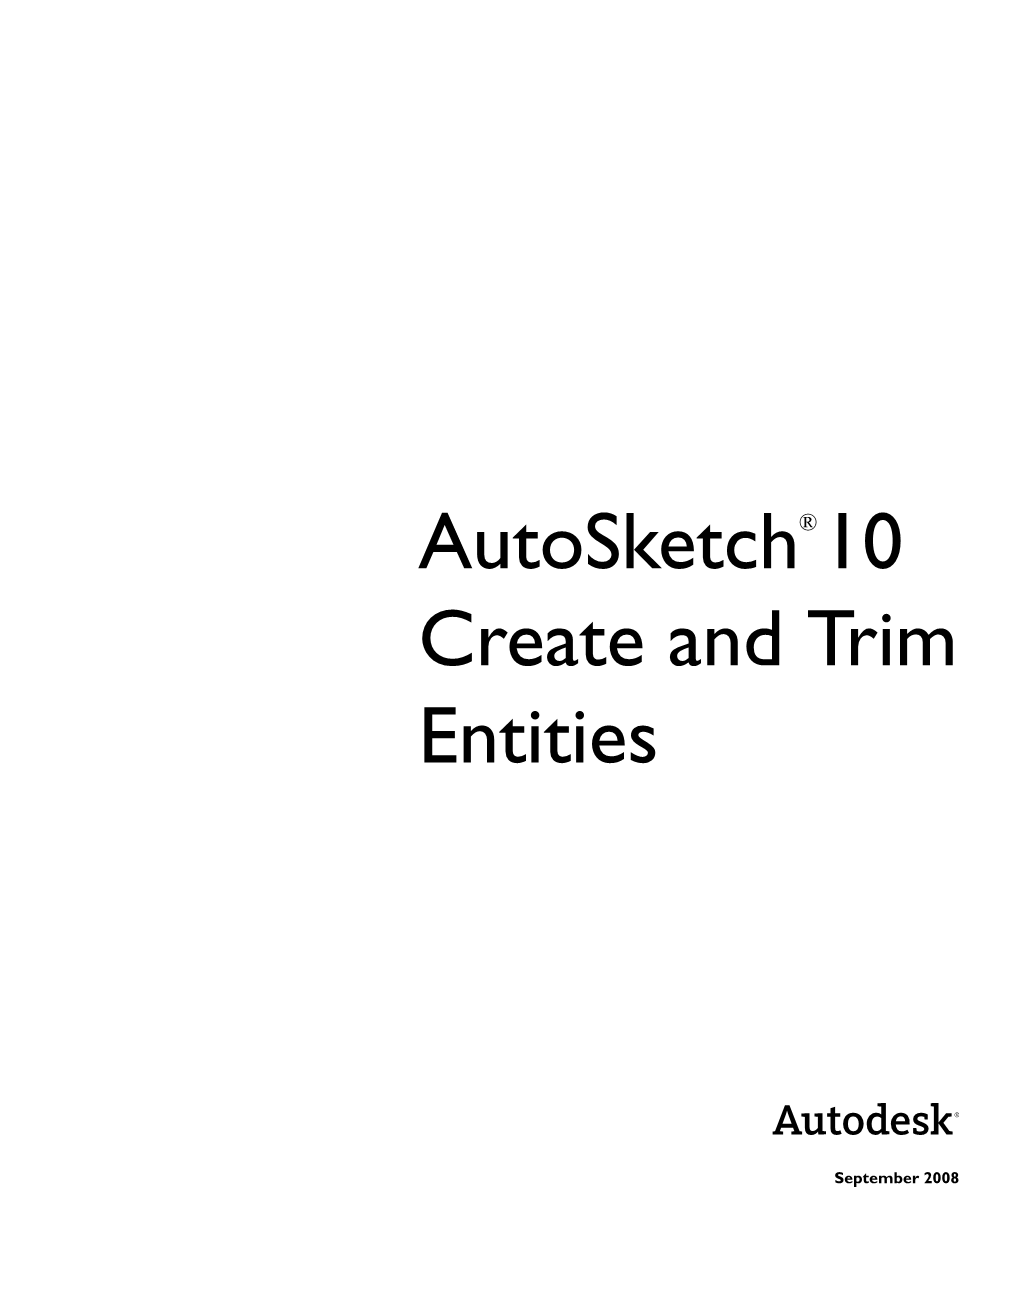 Autosketch 10 Create and Trim Entities